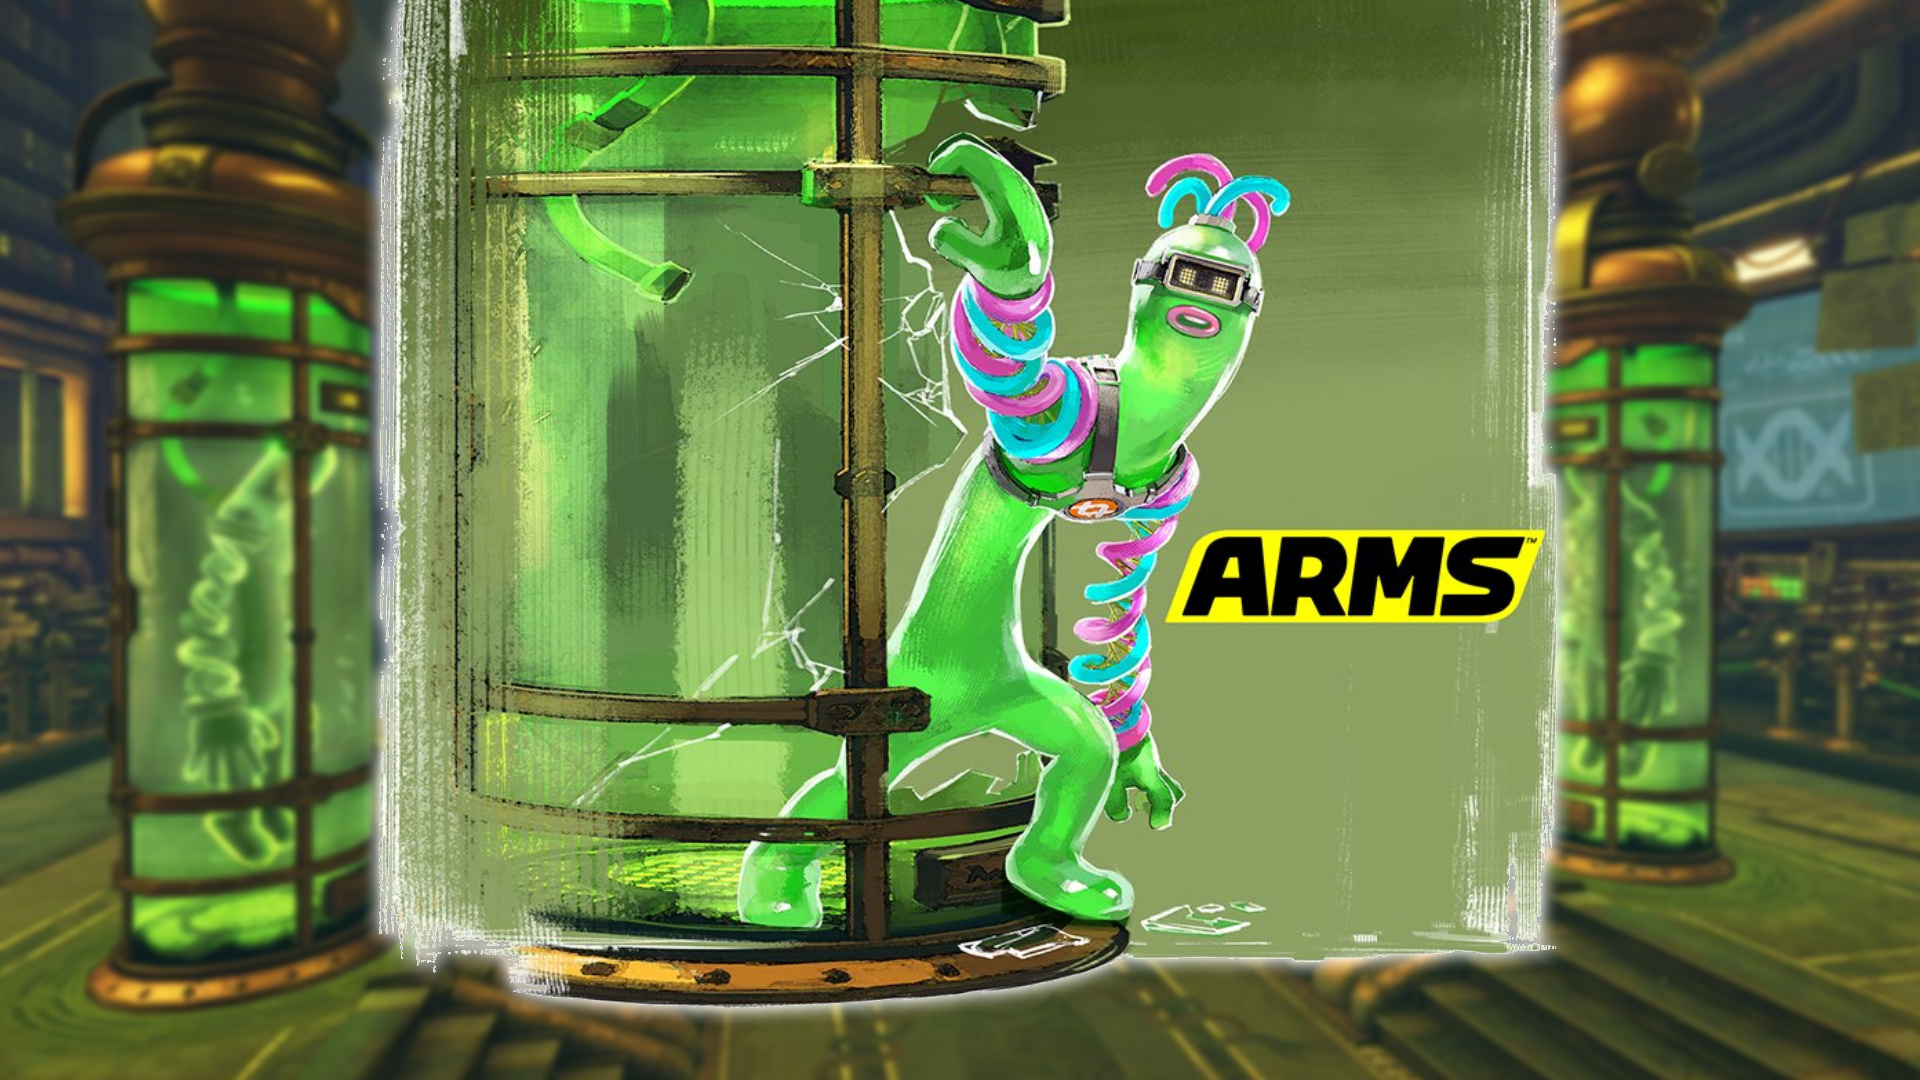 Helix Arms 1920x1080